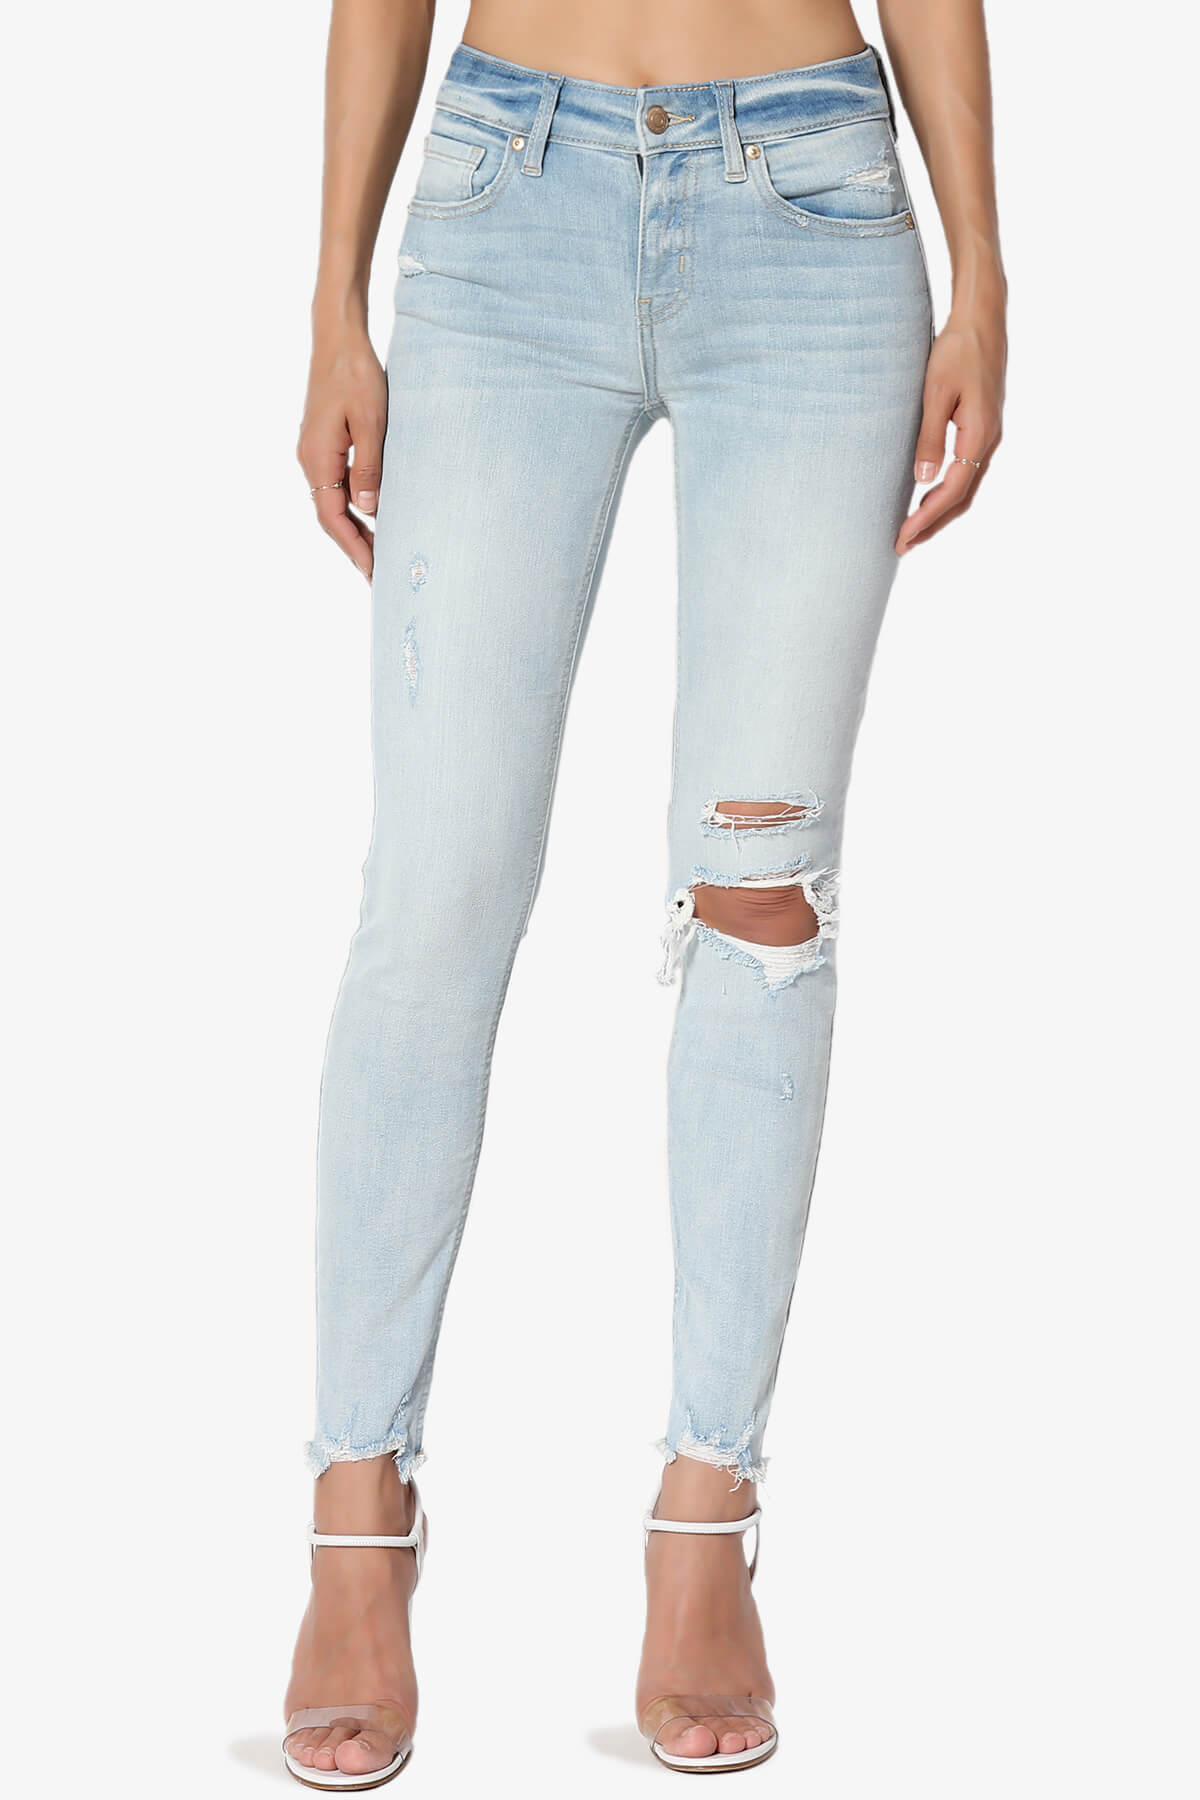 TheMogan Distressed Torned Shred Destroy Mid Rise Raw Edge Skinny Jeans ...